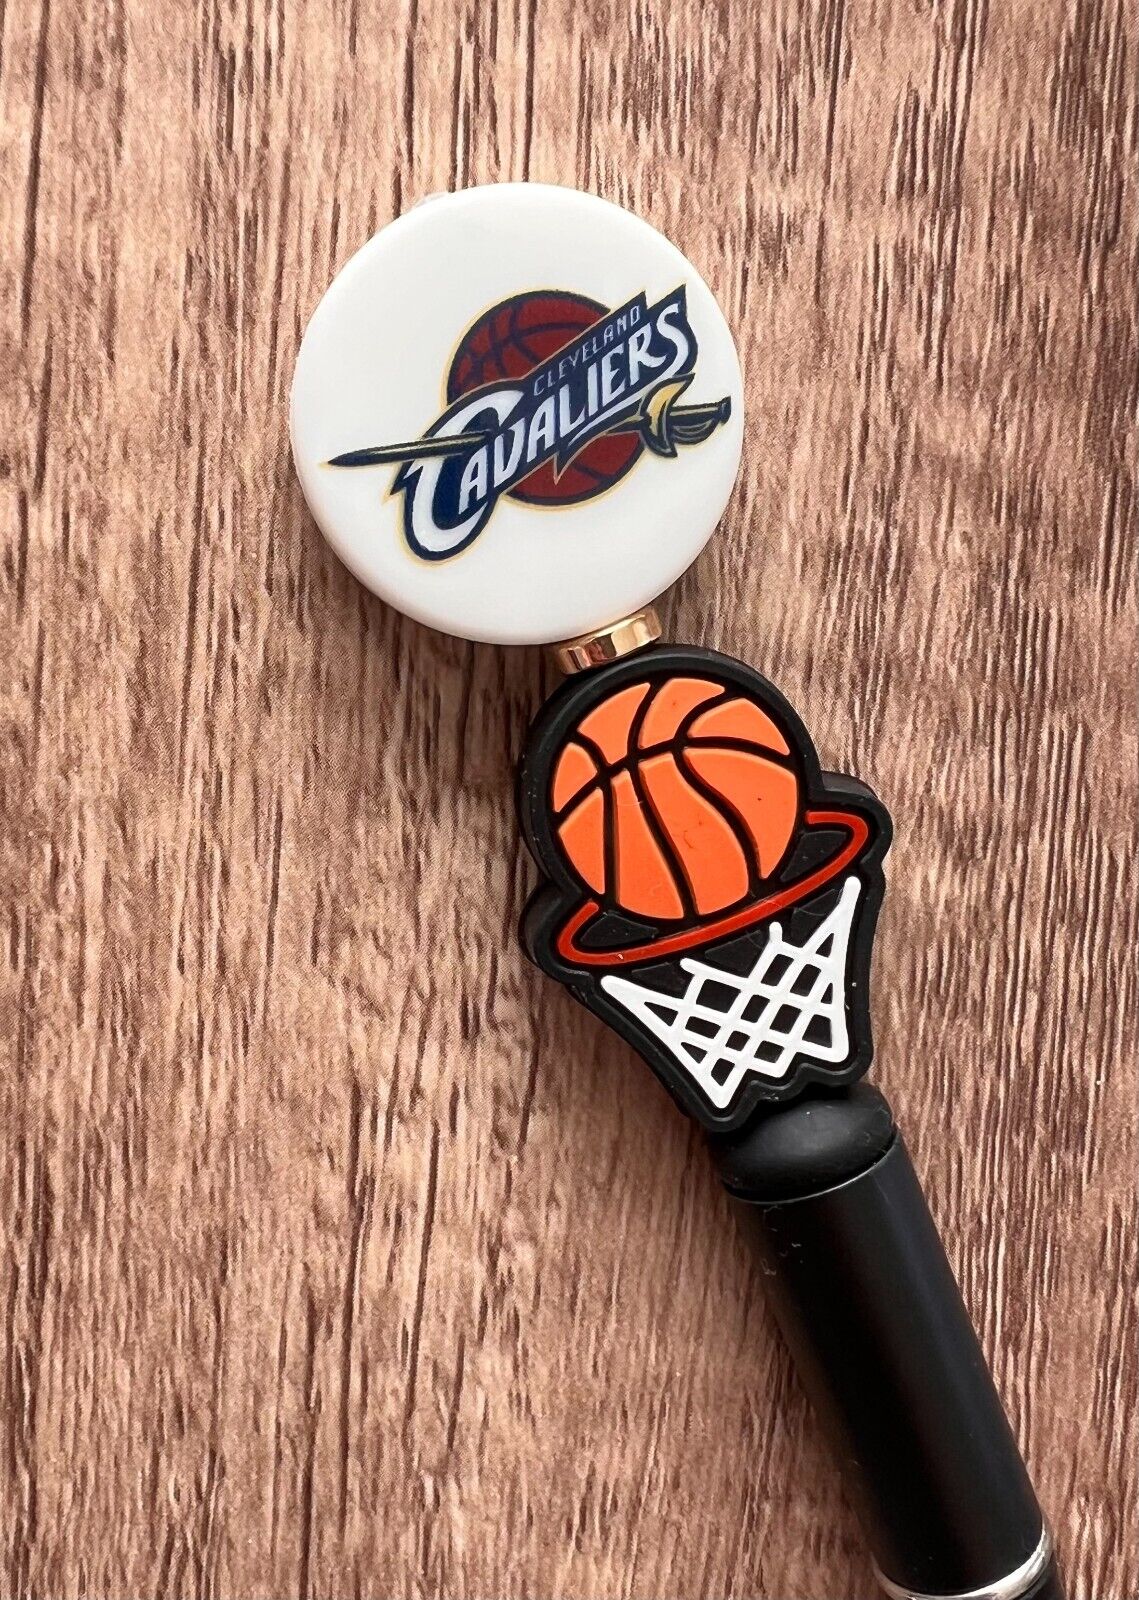 Basketball pen Bucks, Bulls, Pacers, Pistons, Cavaliers. Fan gifts. Collect